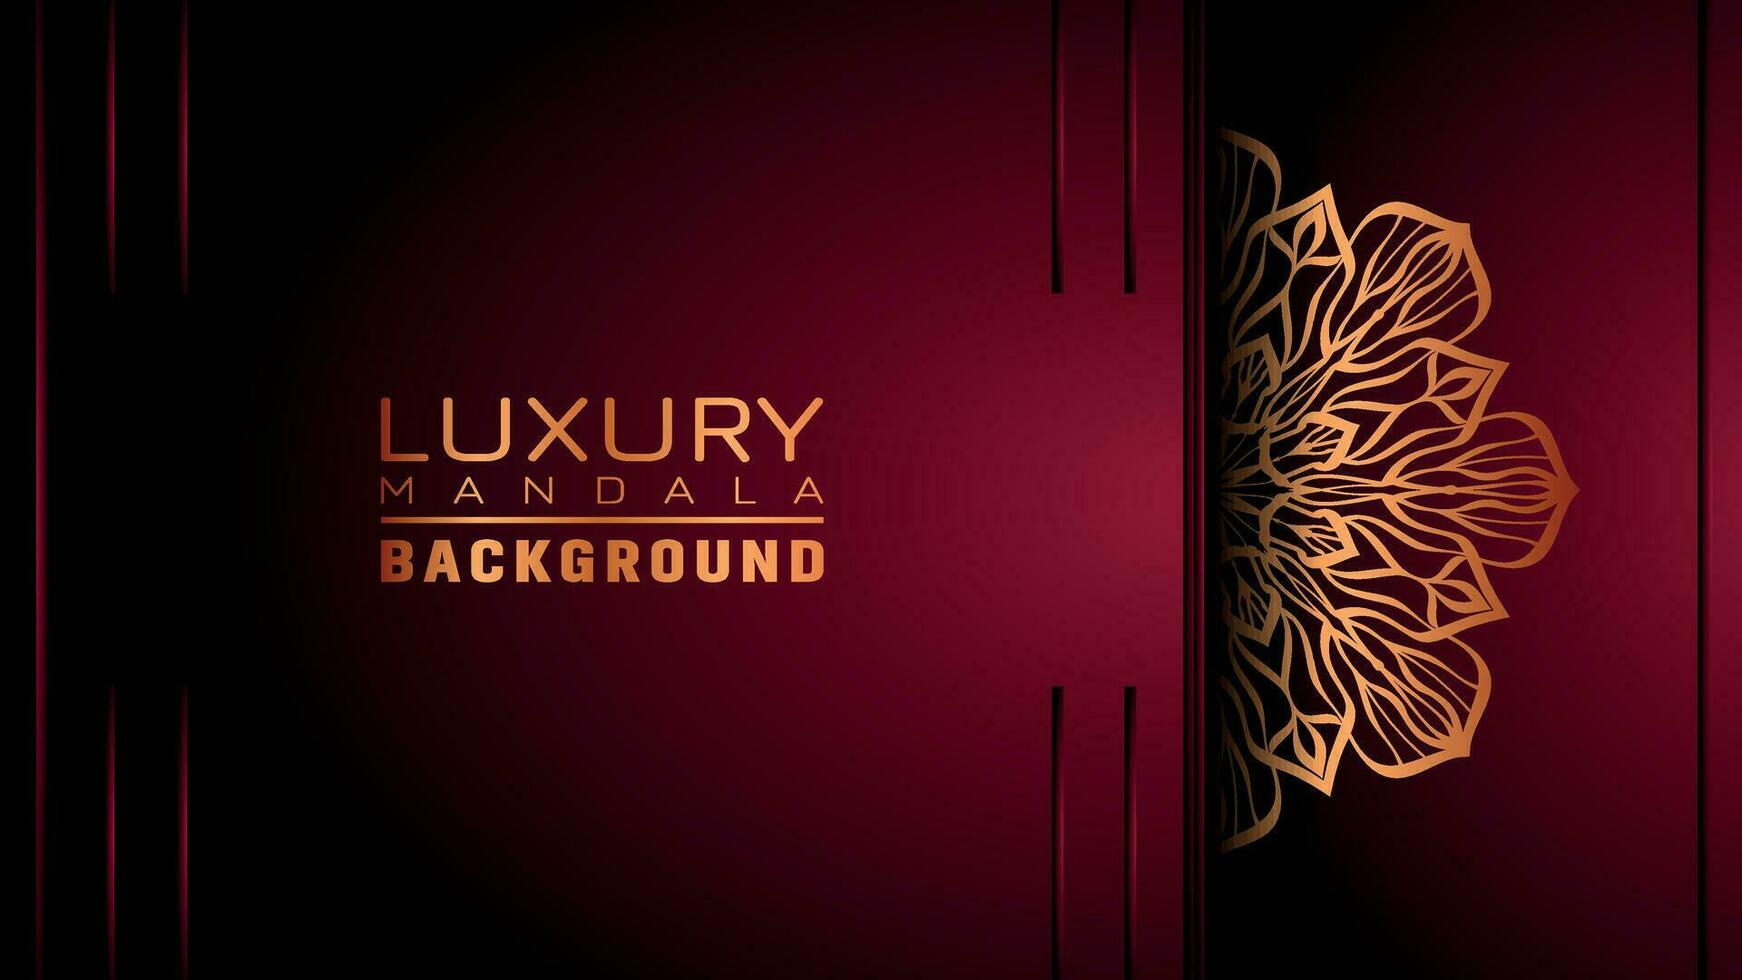 Luxury mandala background ornamental, arabesque style With Golden Arabesque Pattern Style. Decorative Mandala Ornament For Print, Brochure, Banner, Cover, Poster, Invitation Card vector